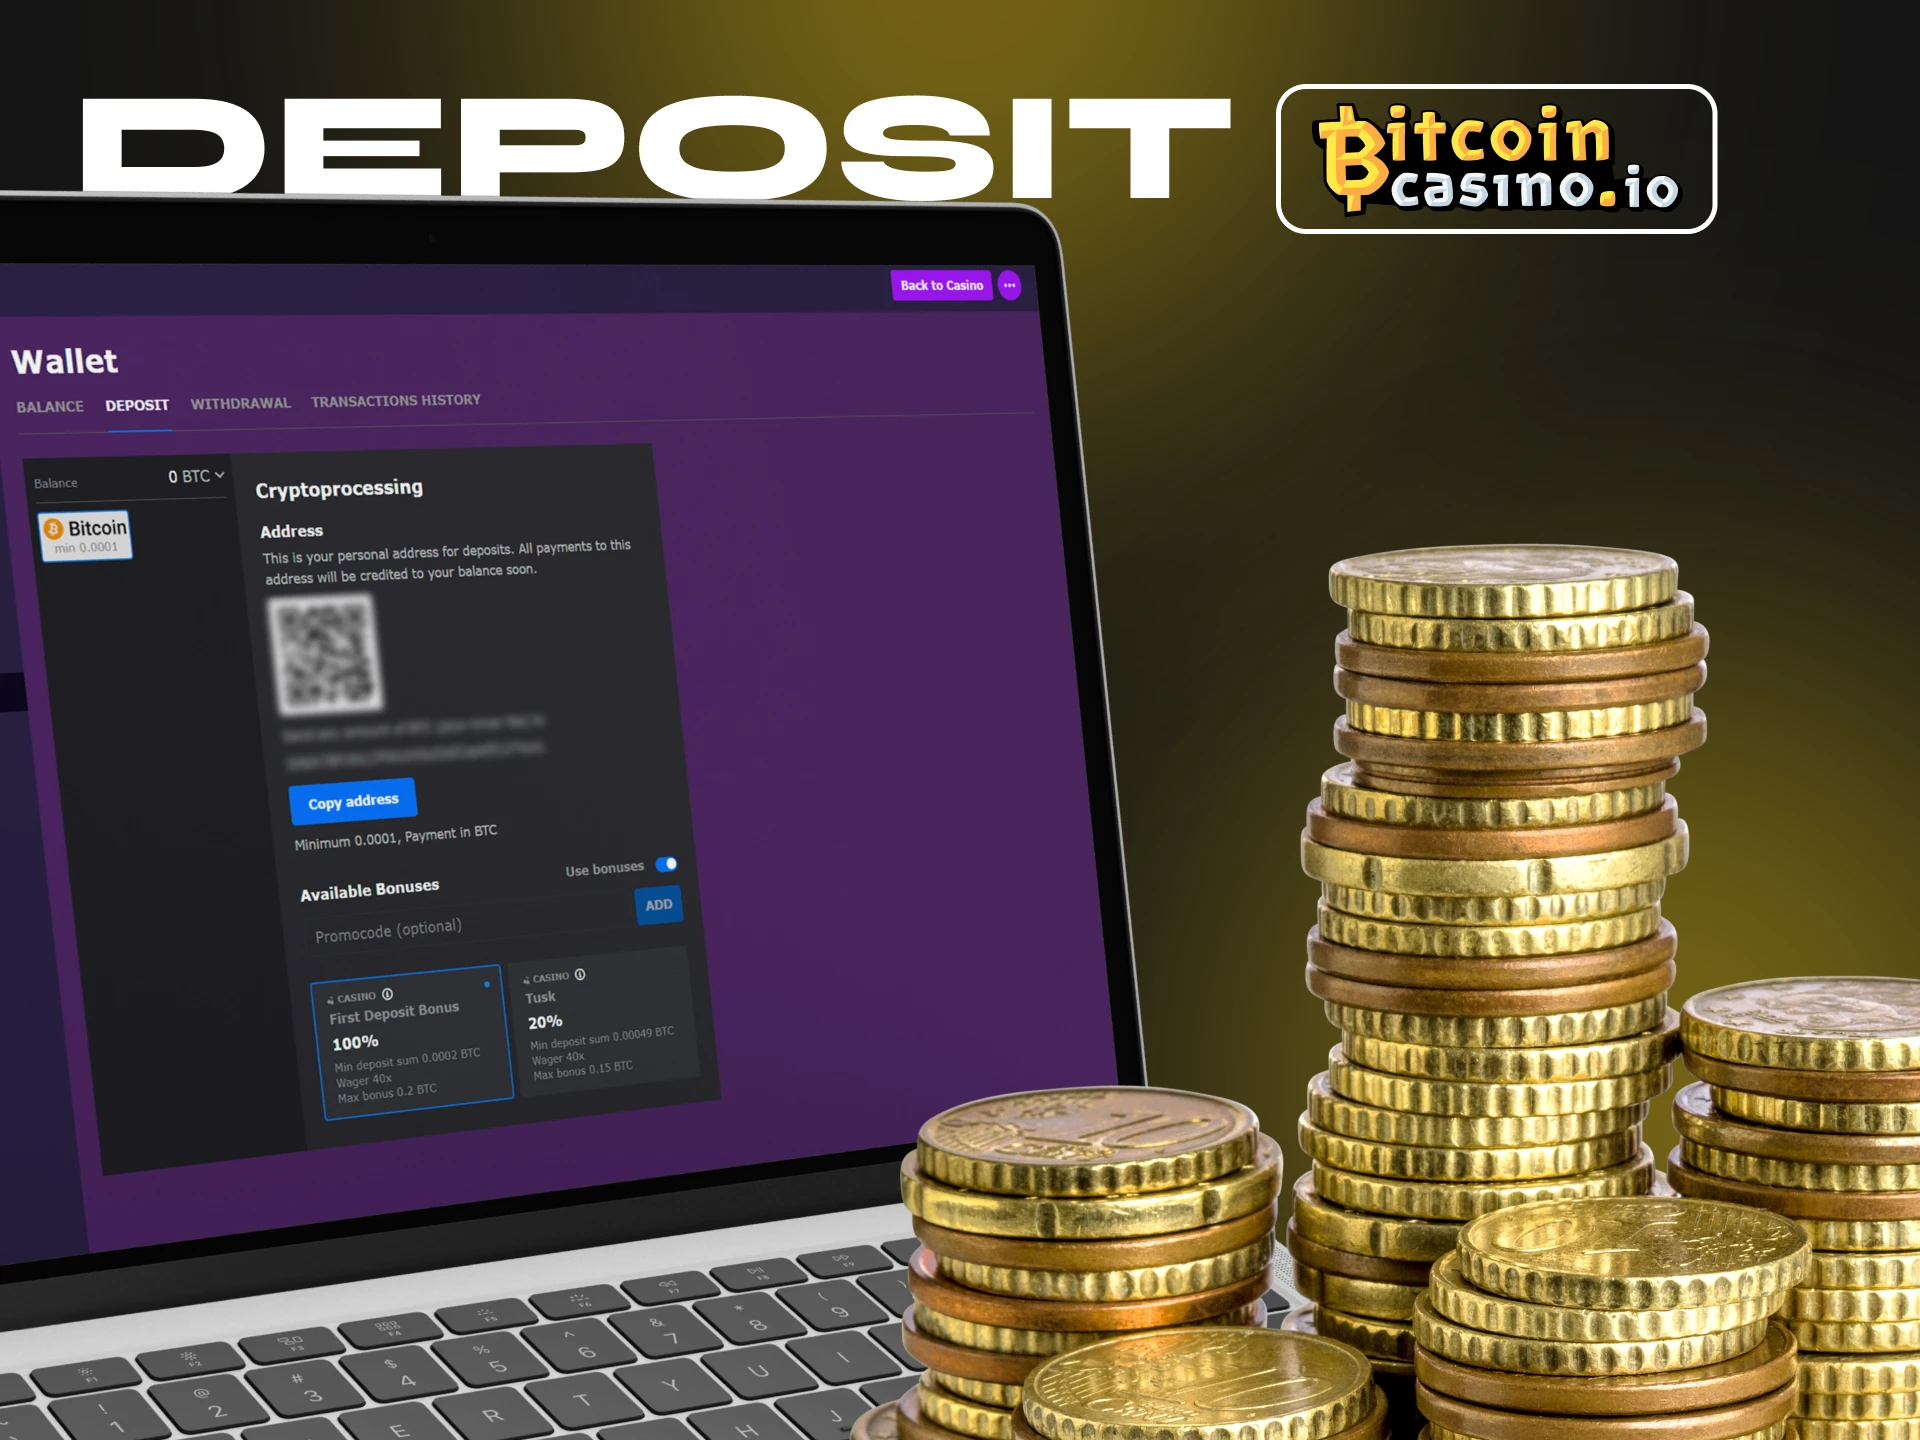 Deposit money into Bitcoincasino in a currency convenient for you.